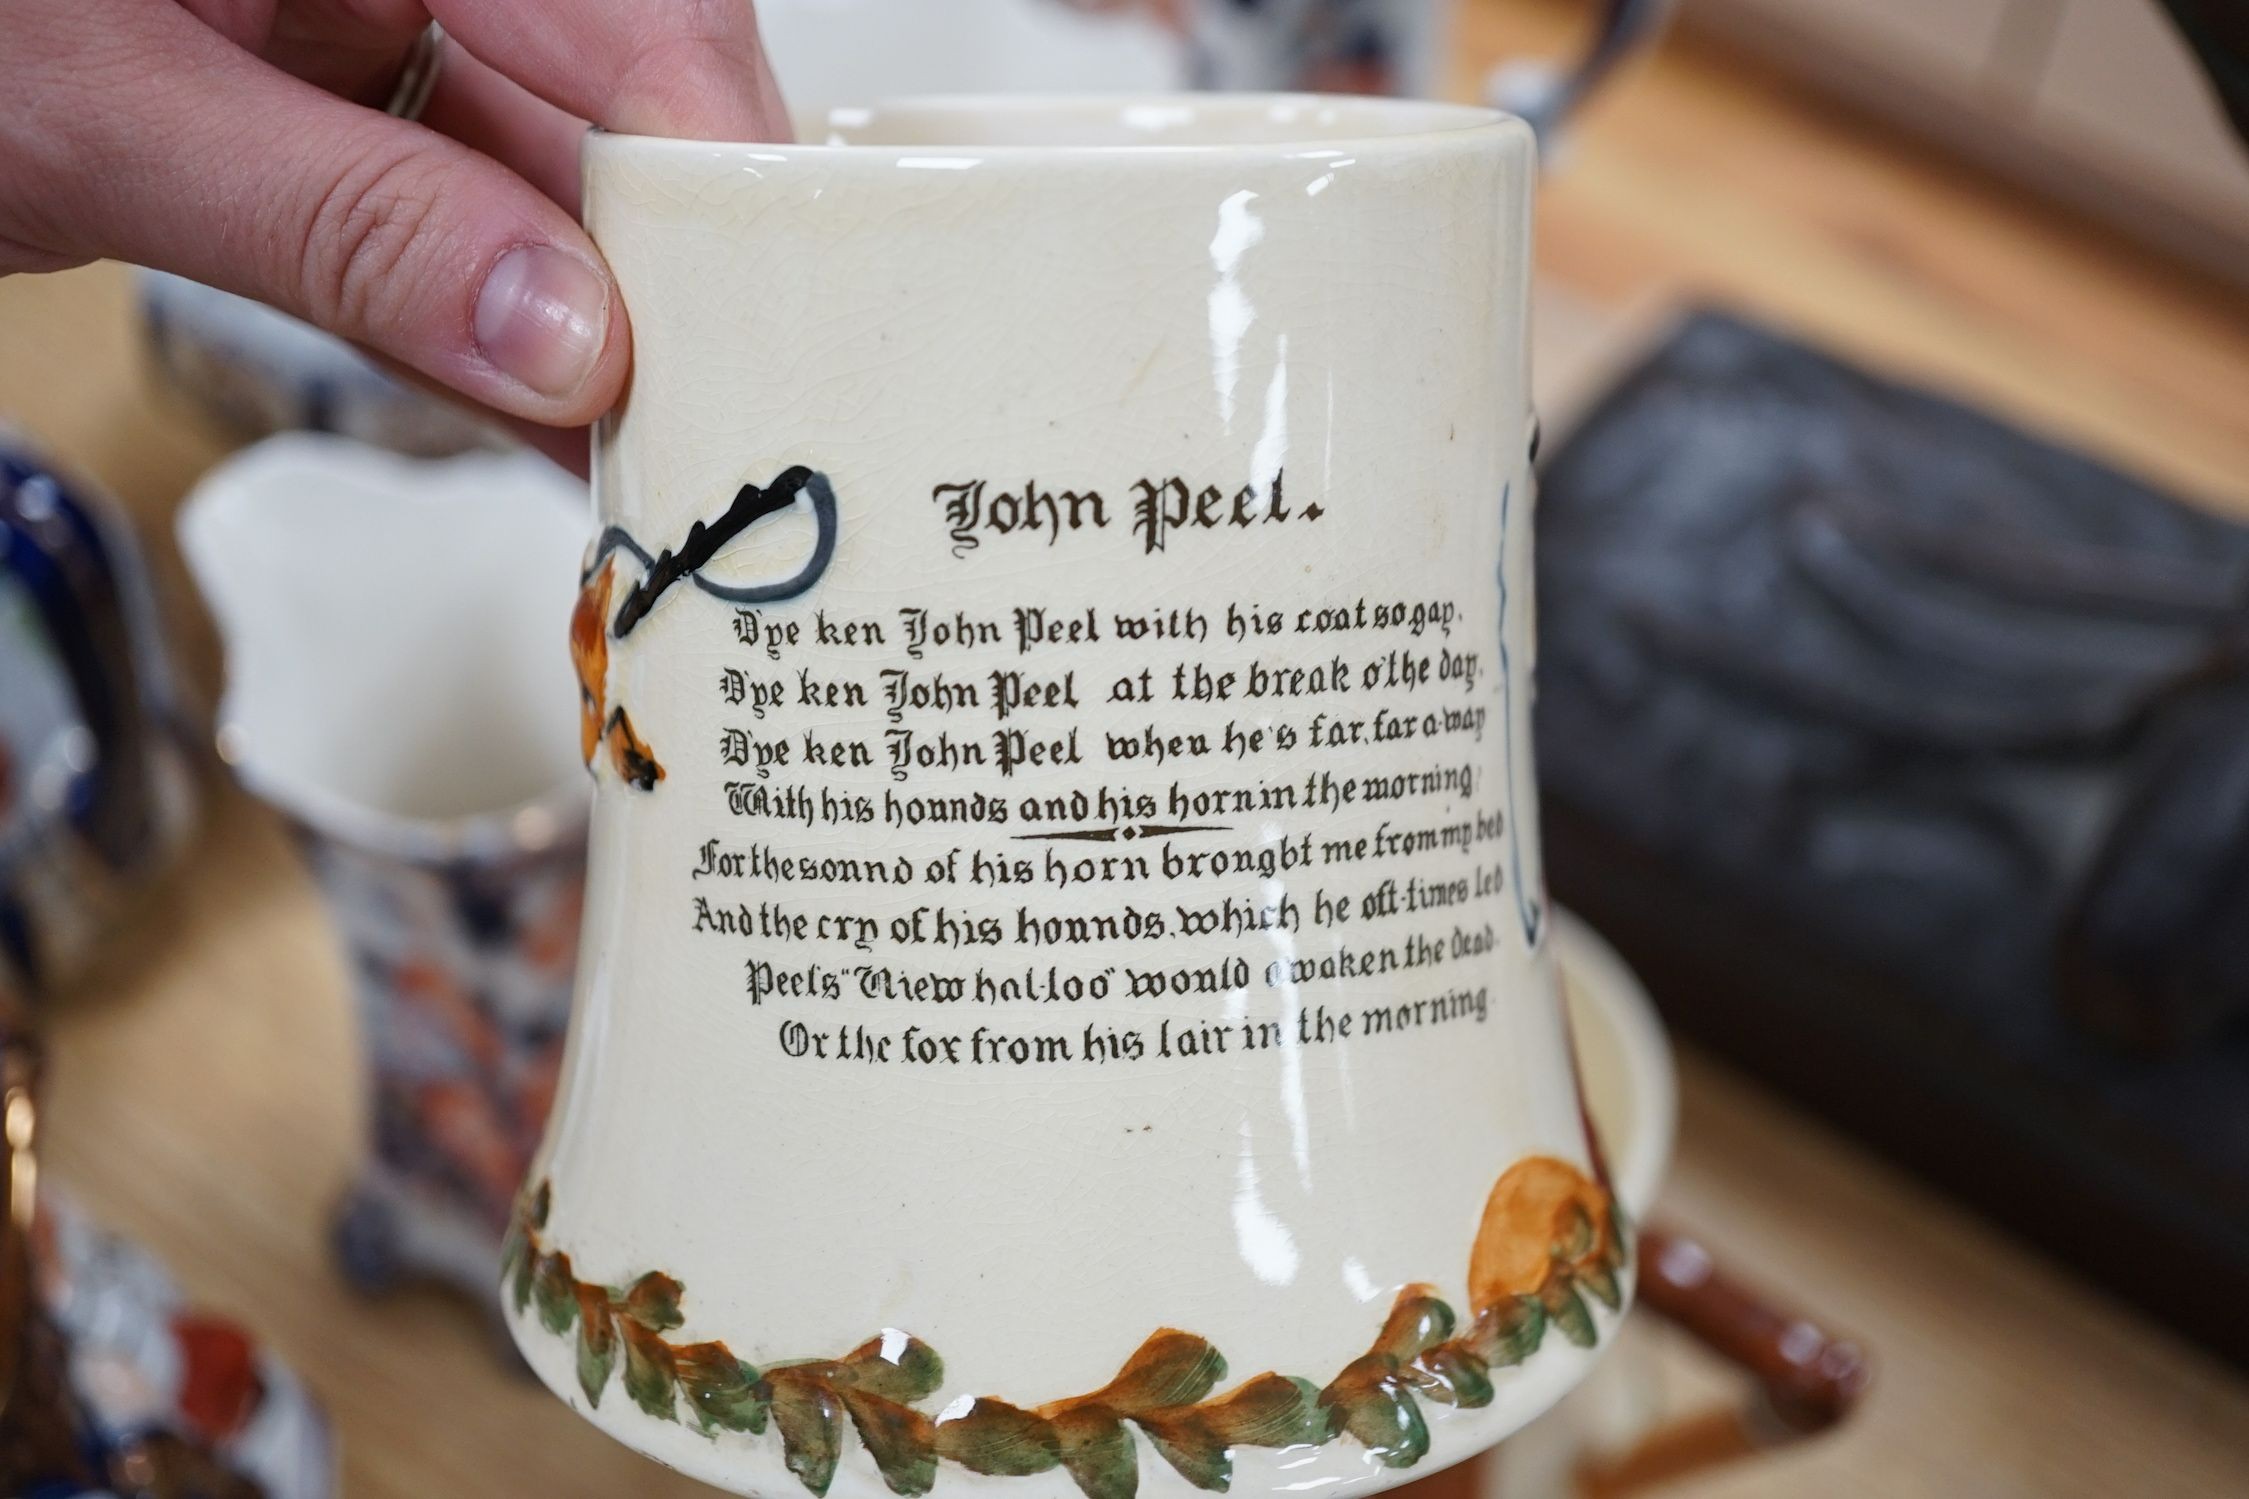 Two sets of Victorian graduated jugs, a Toby tea pot and two John Peel musical mugs